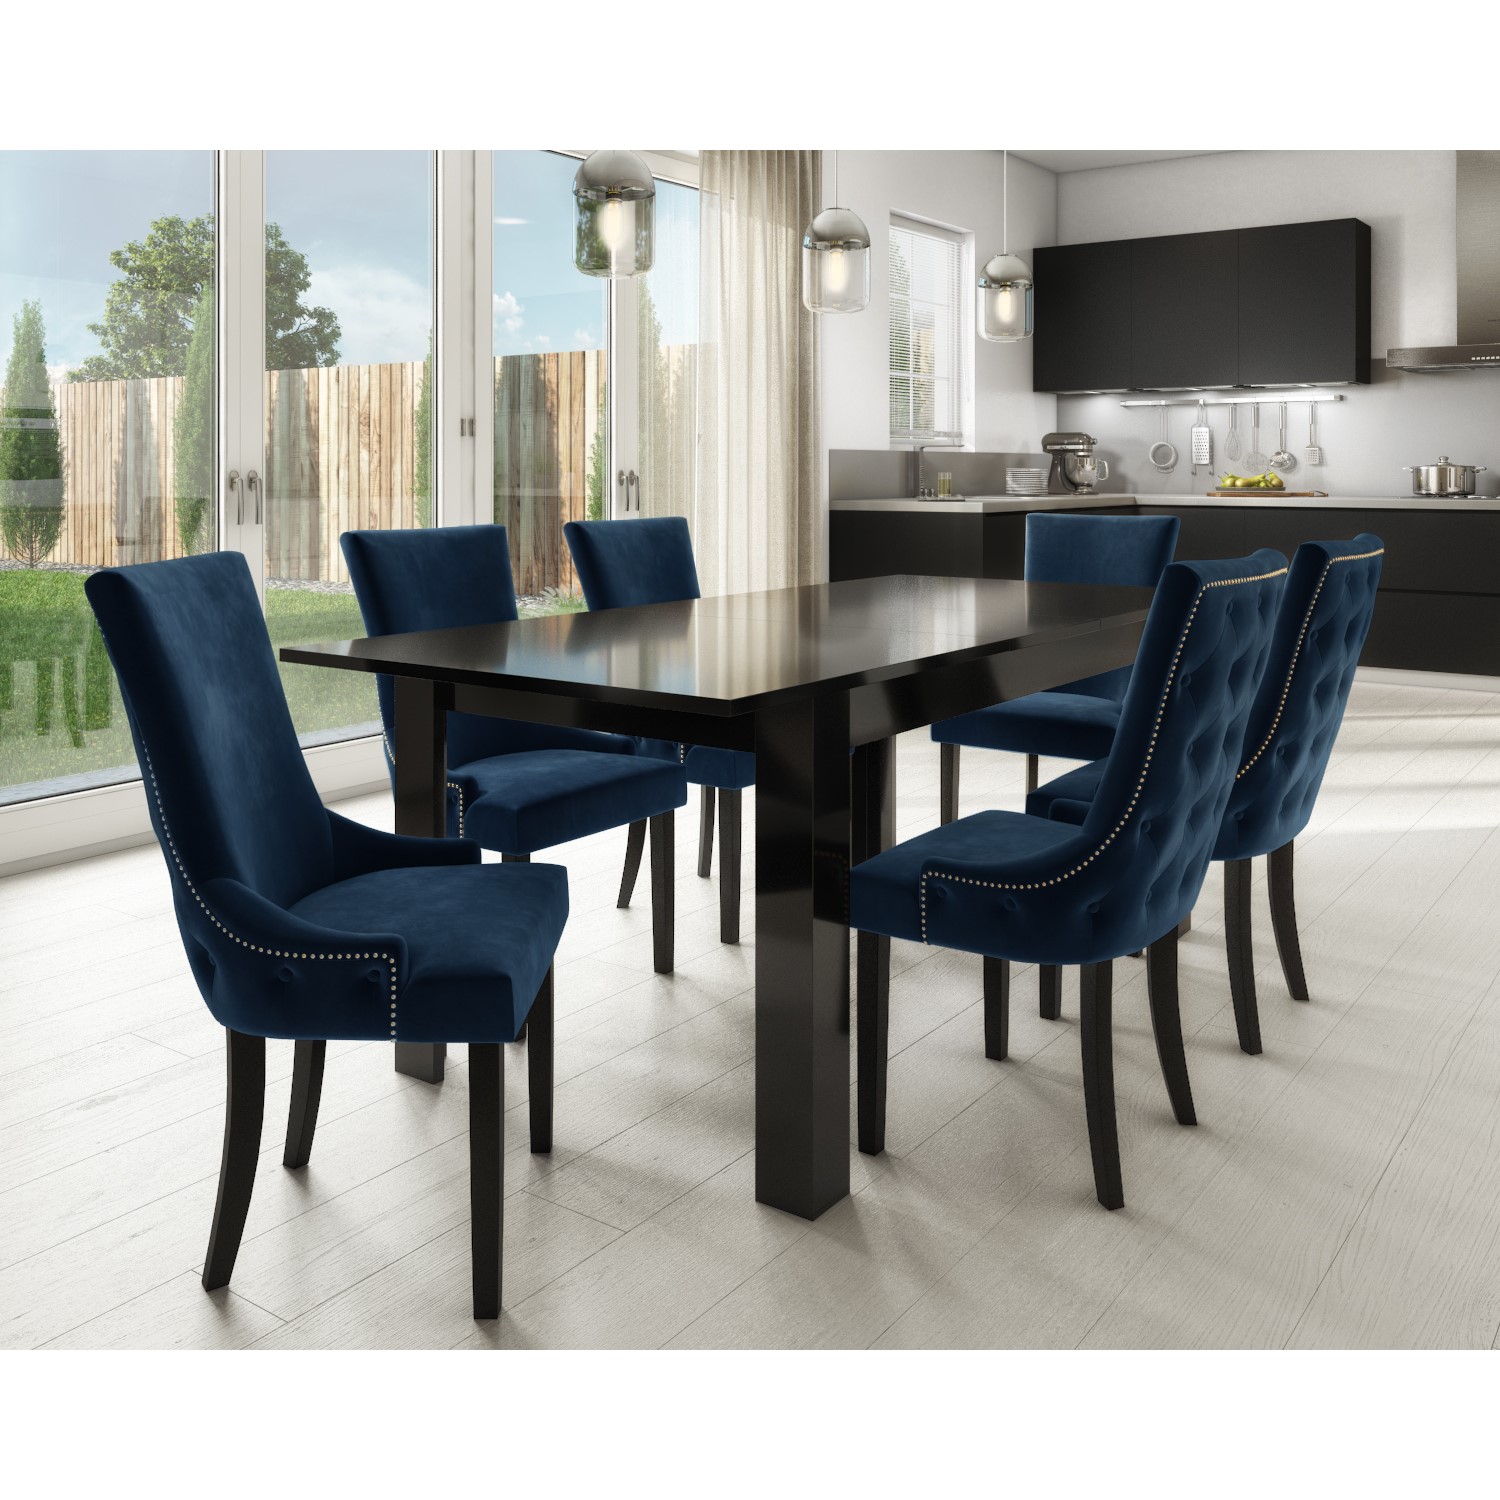 Navy Blue Dining Room Table And Chairs - Modern Contemporary Navy Blue